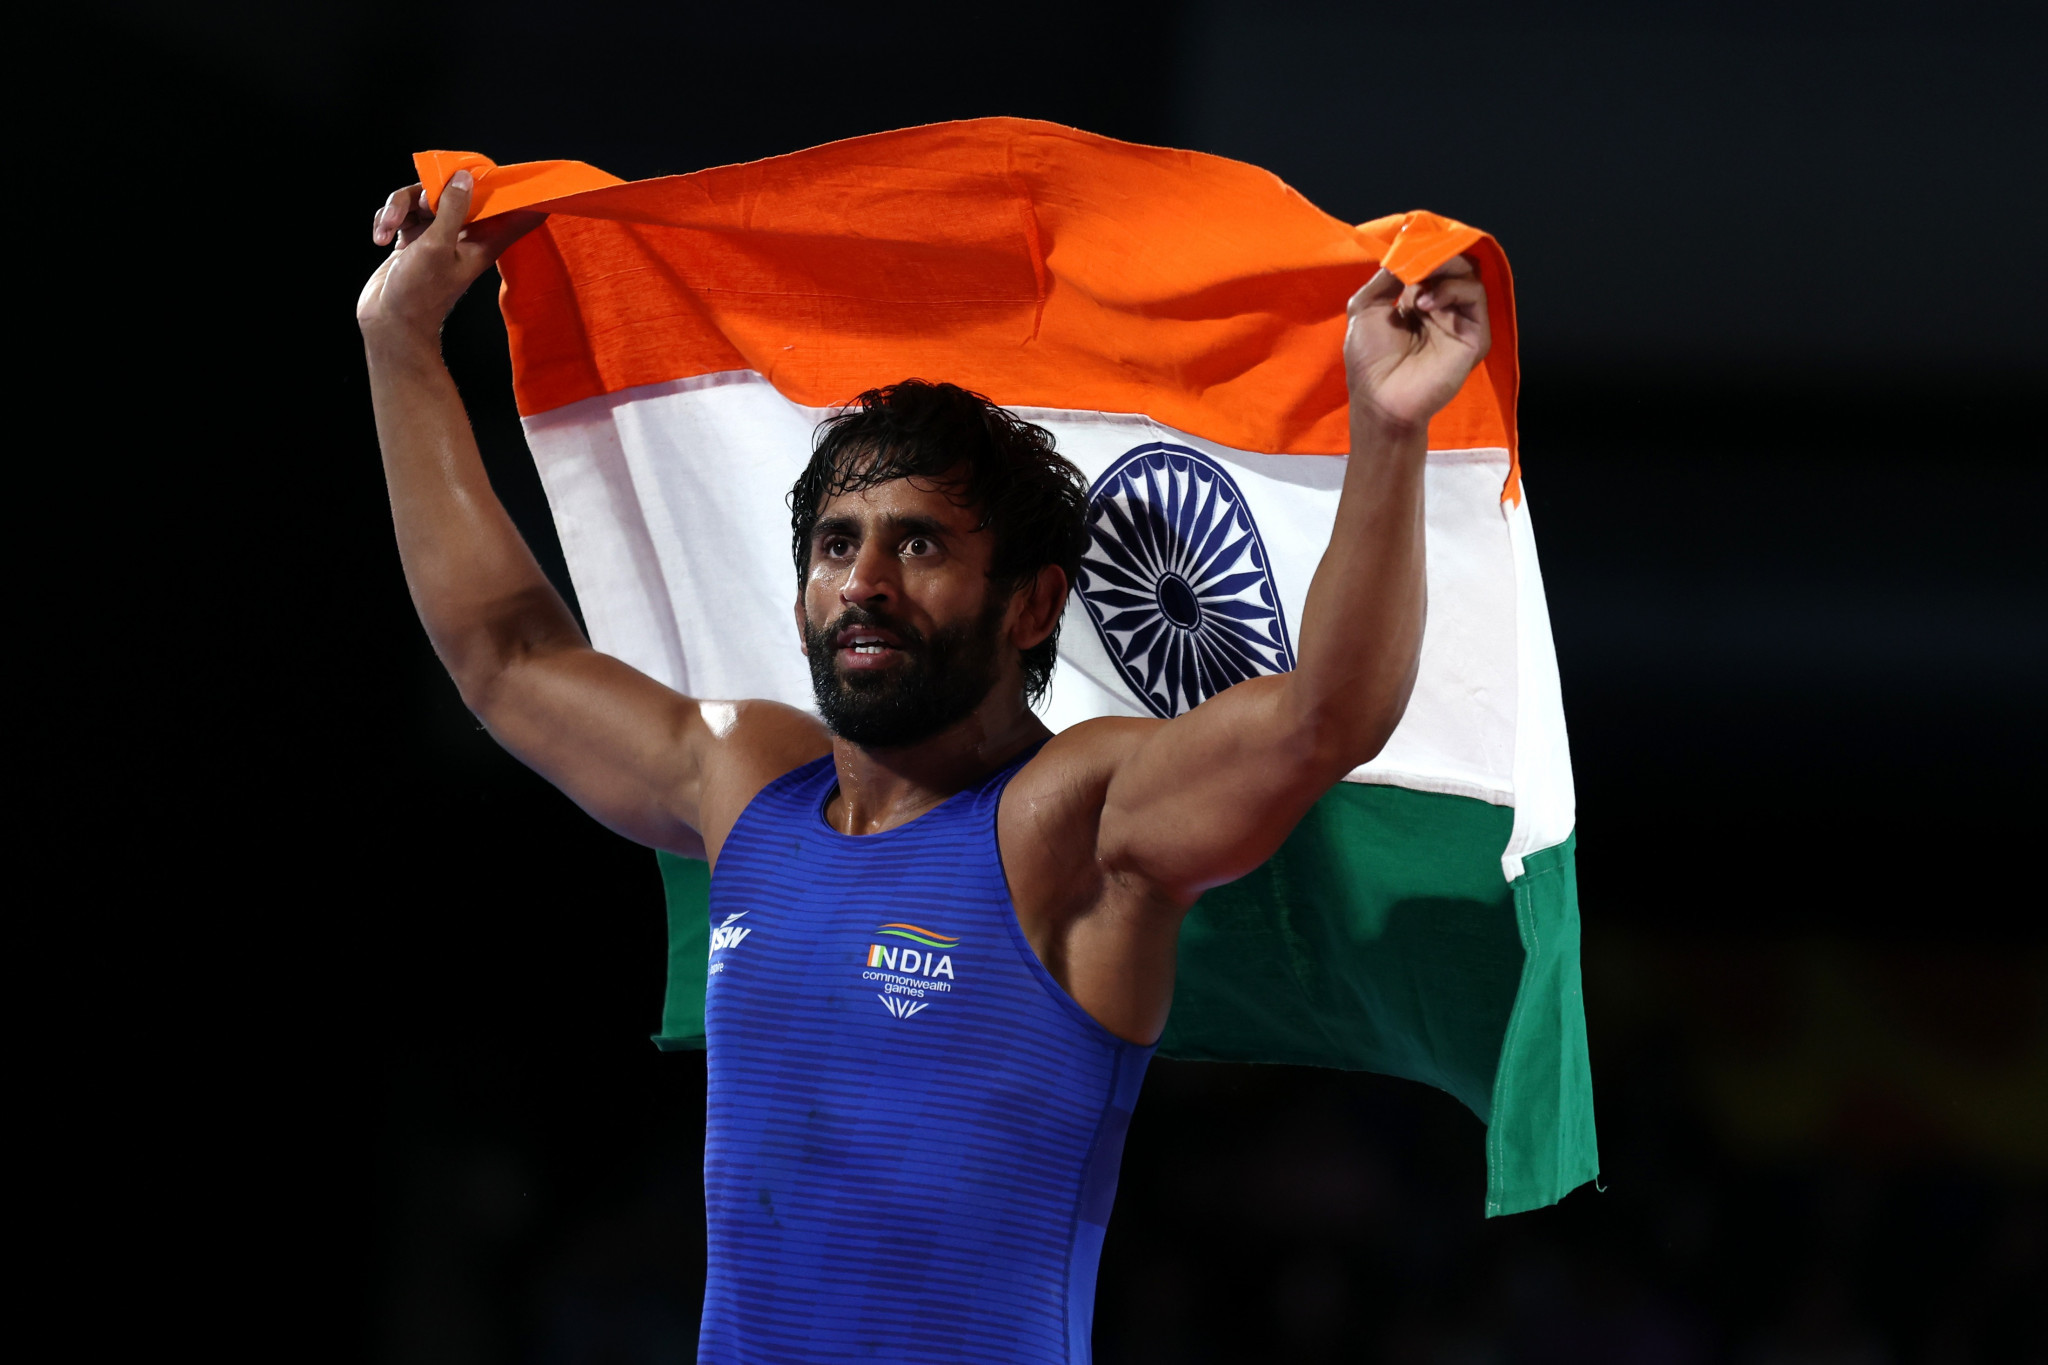 Bajrang Punia is one of the athletes who claim they will not compete for India until the WFI President has left permanently ©Getty Images